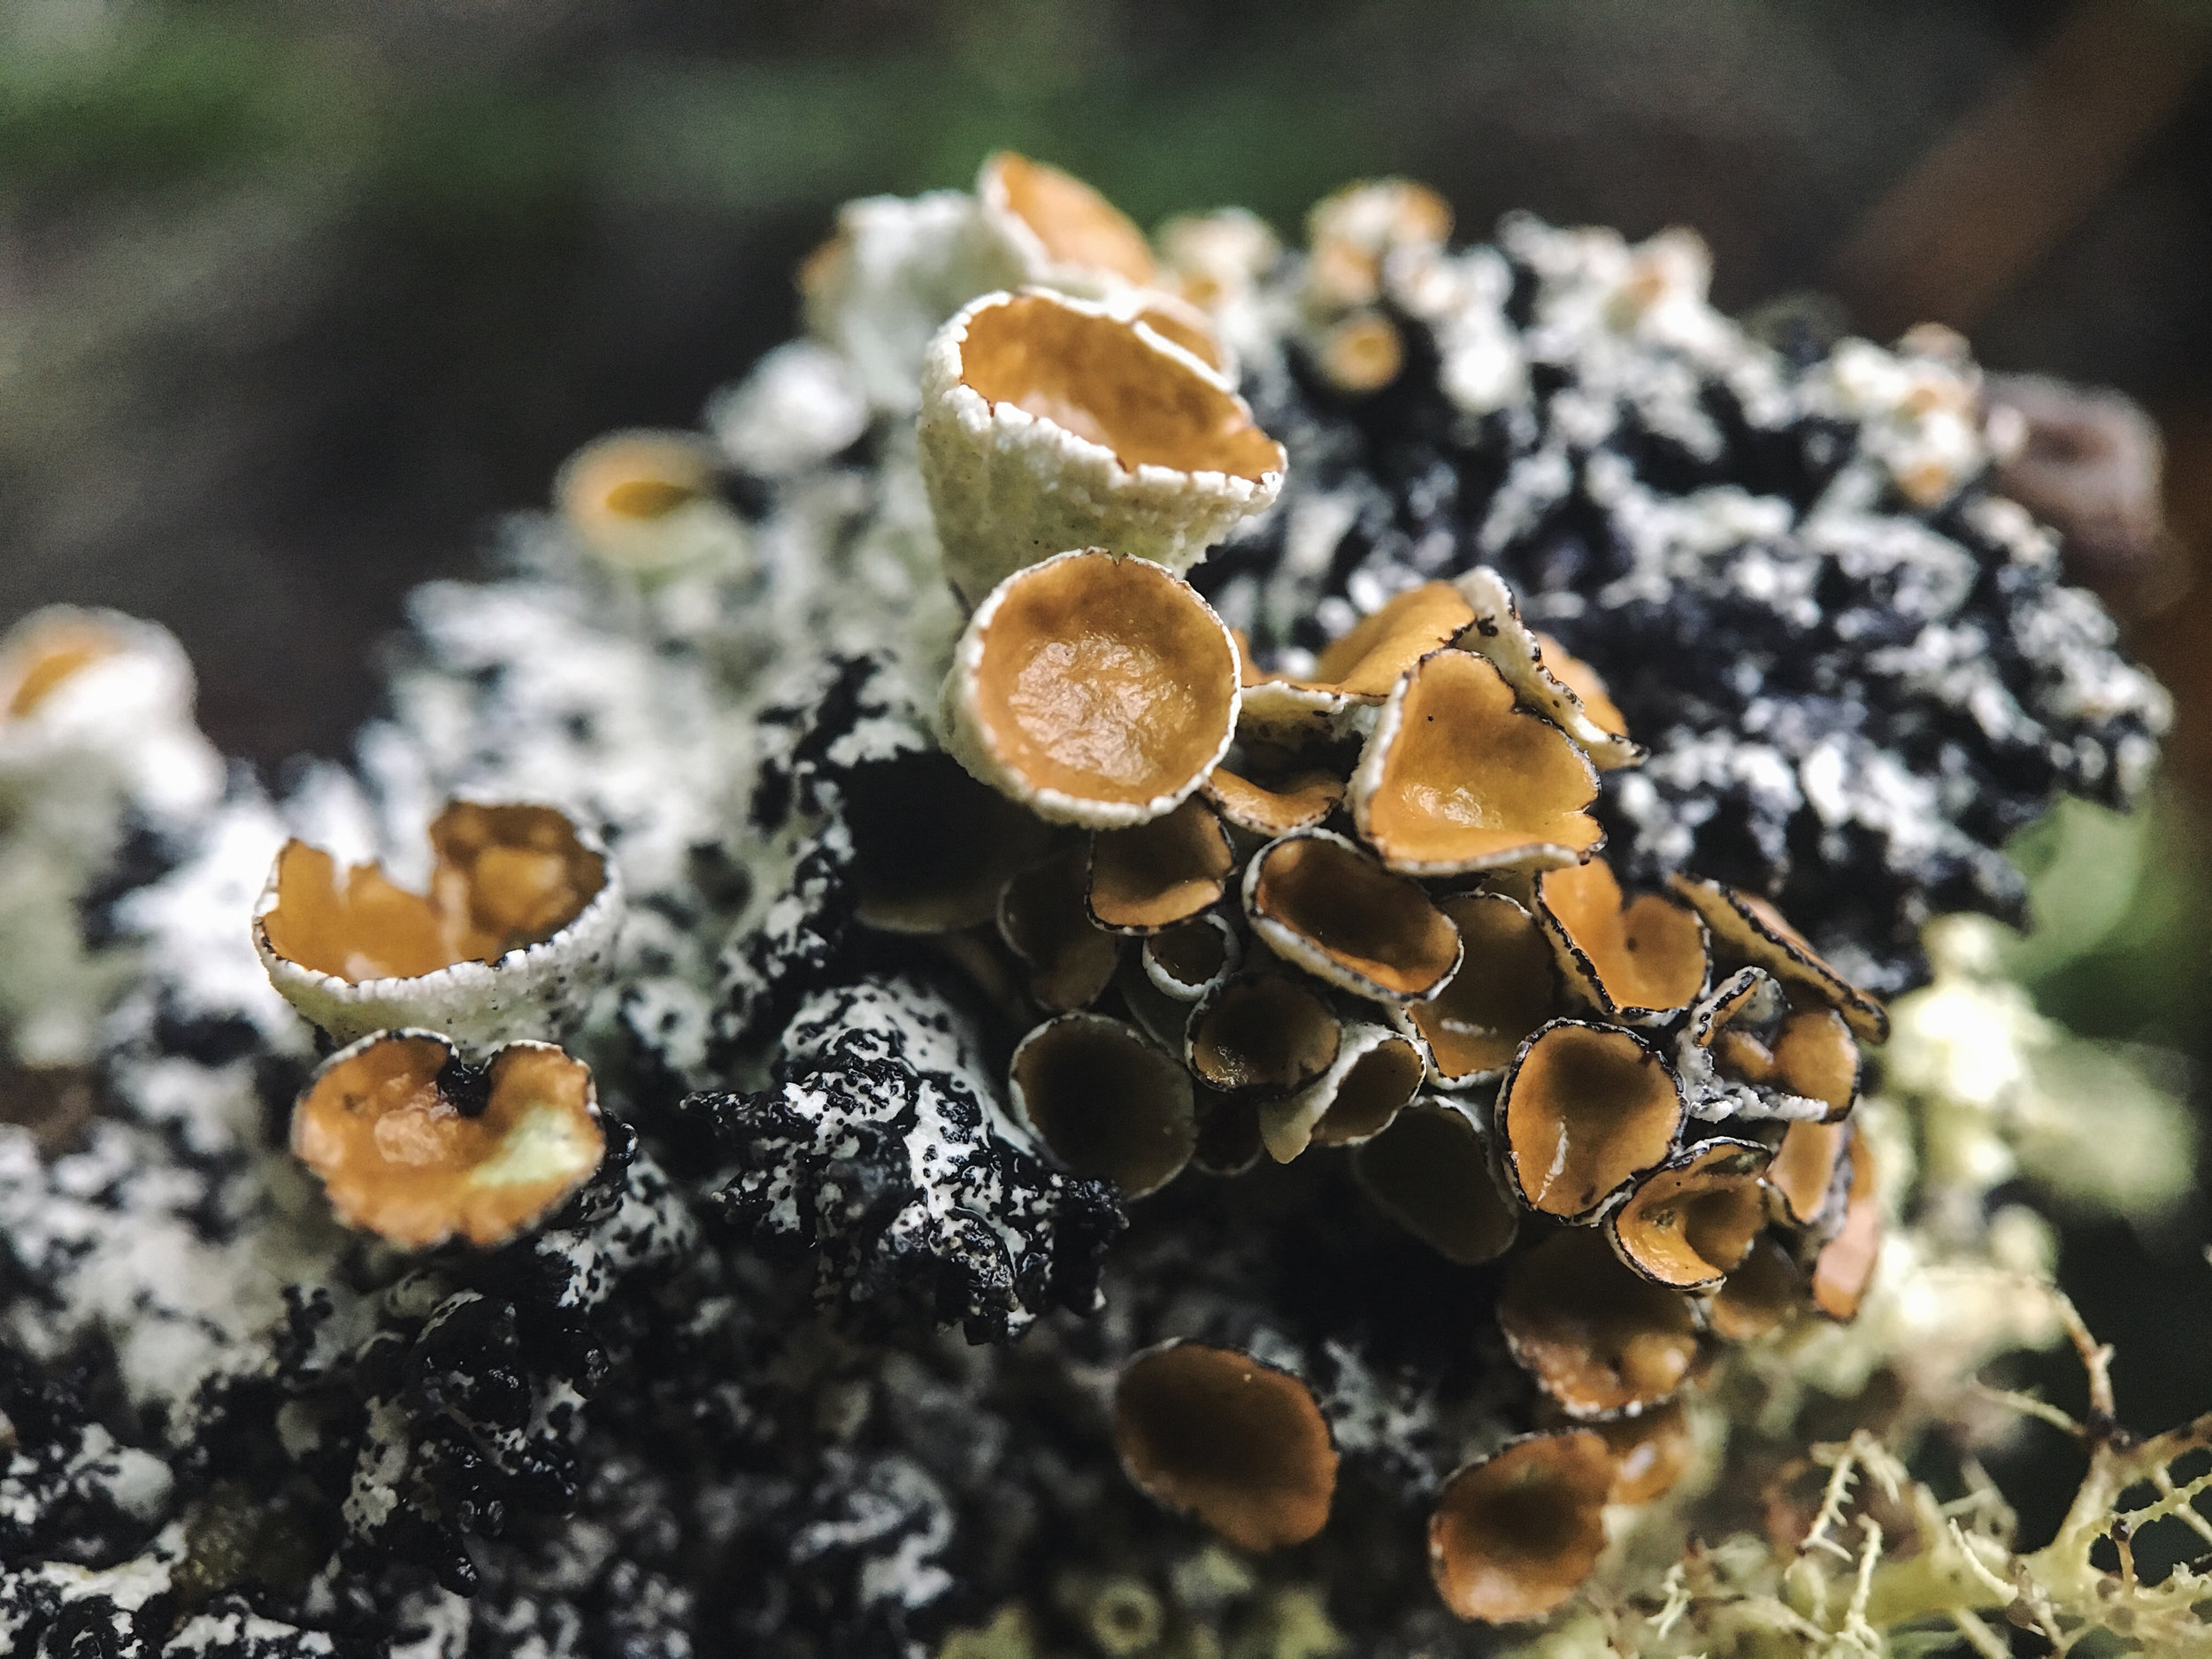 "Apothecia" (reproductive structures) disperse spores. Only the fungal half of the lichen has them. #funfacts